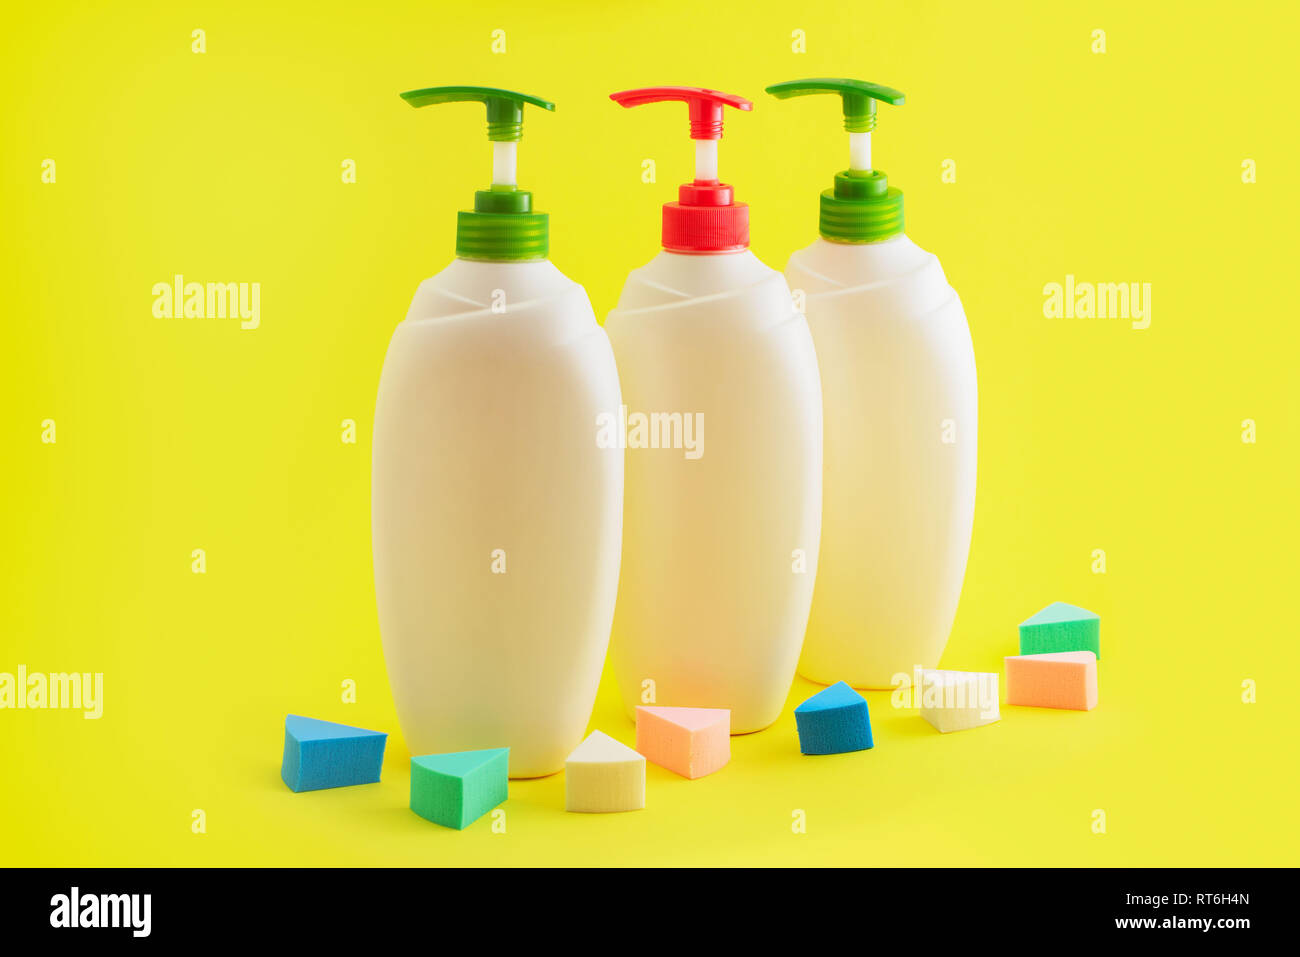 Download Three Plastic Bottles With Dispenser On Yellow Background Cosmetics For Body And Hair Stock Photo Alamy PSD Mockup Templates